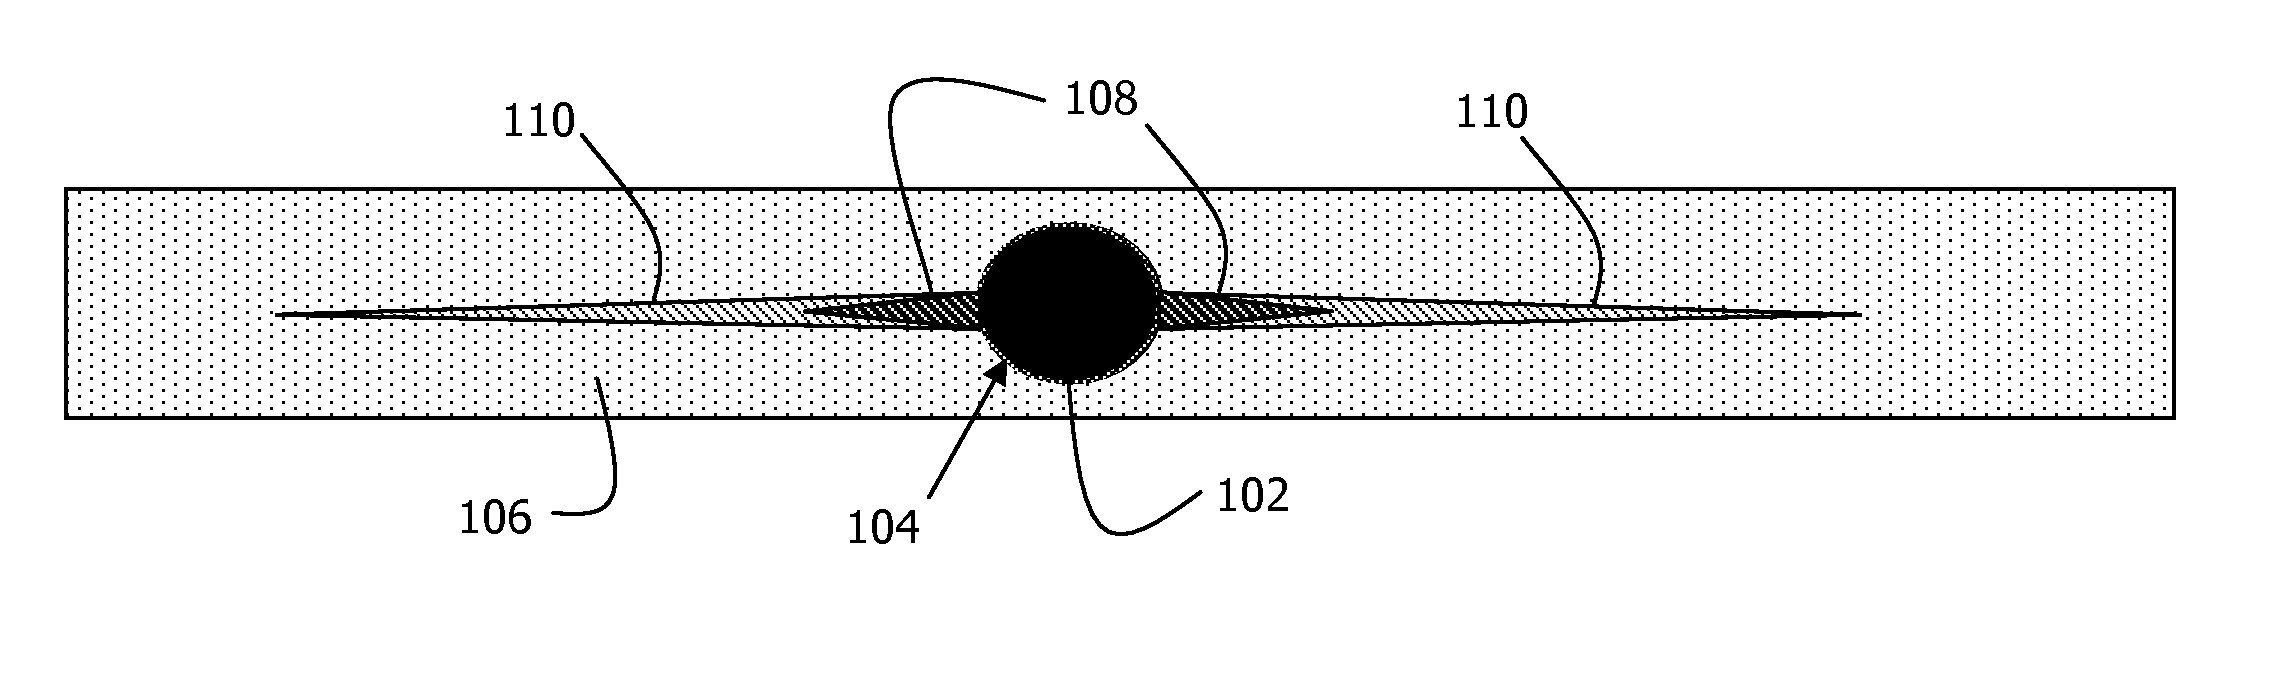 Method for Treating a Subterranean Formation